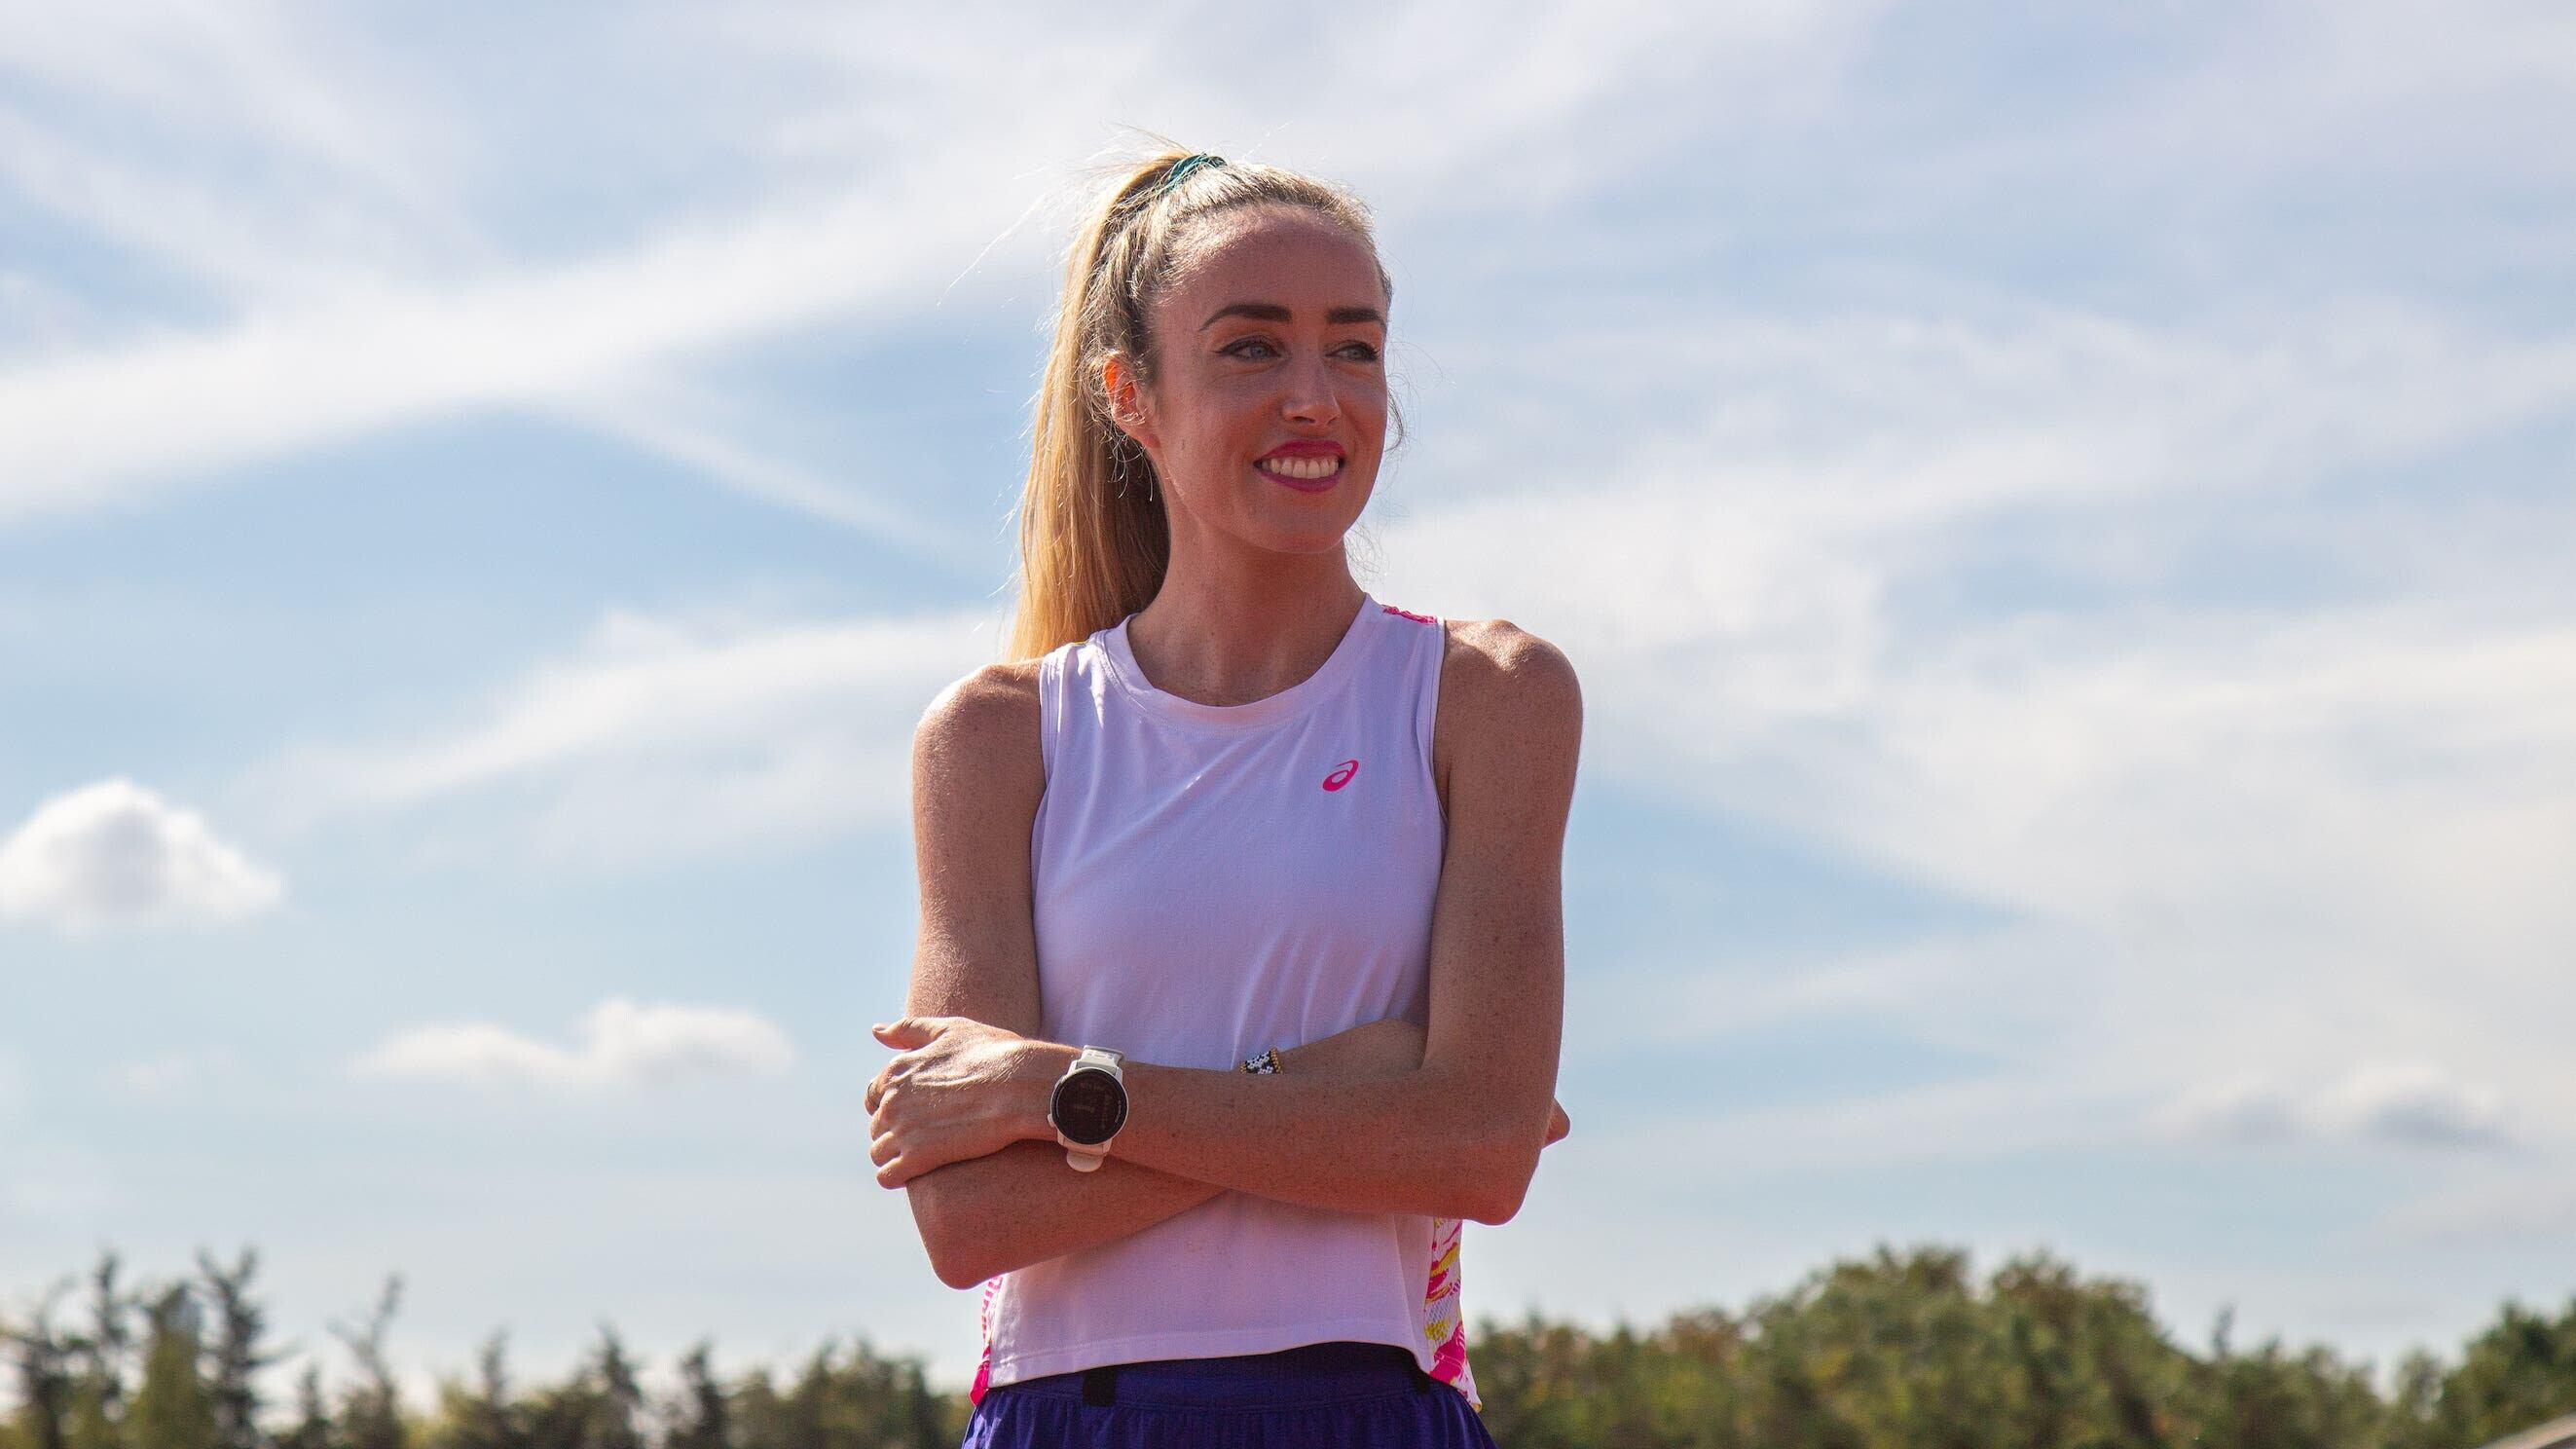 Long distance runner Eilish McColgan will feature in a new BBC documentary (Studio Something/PA)